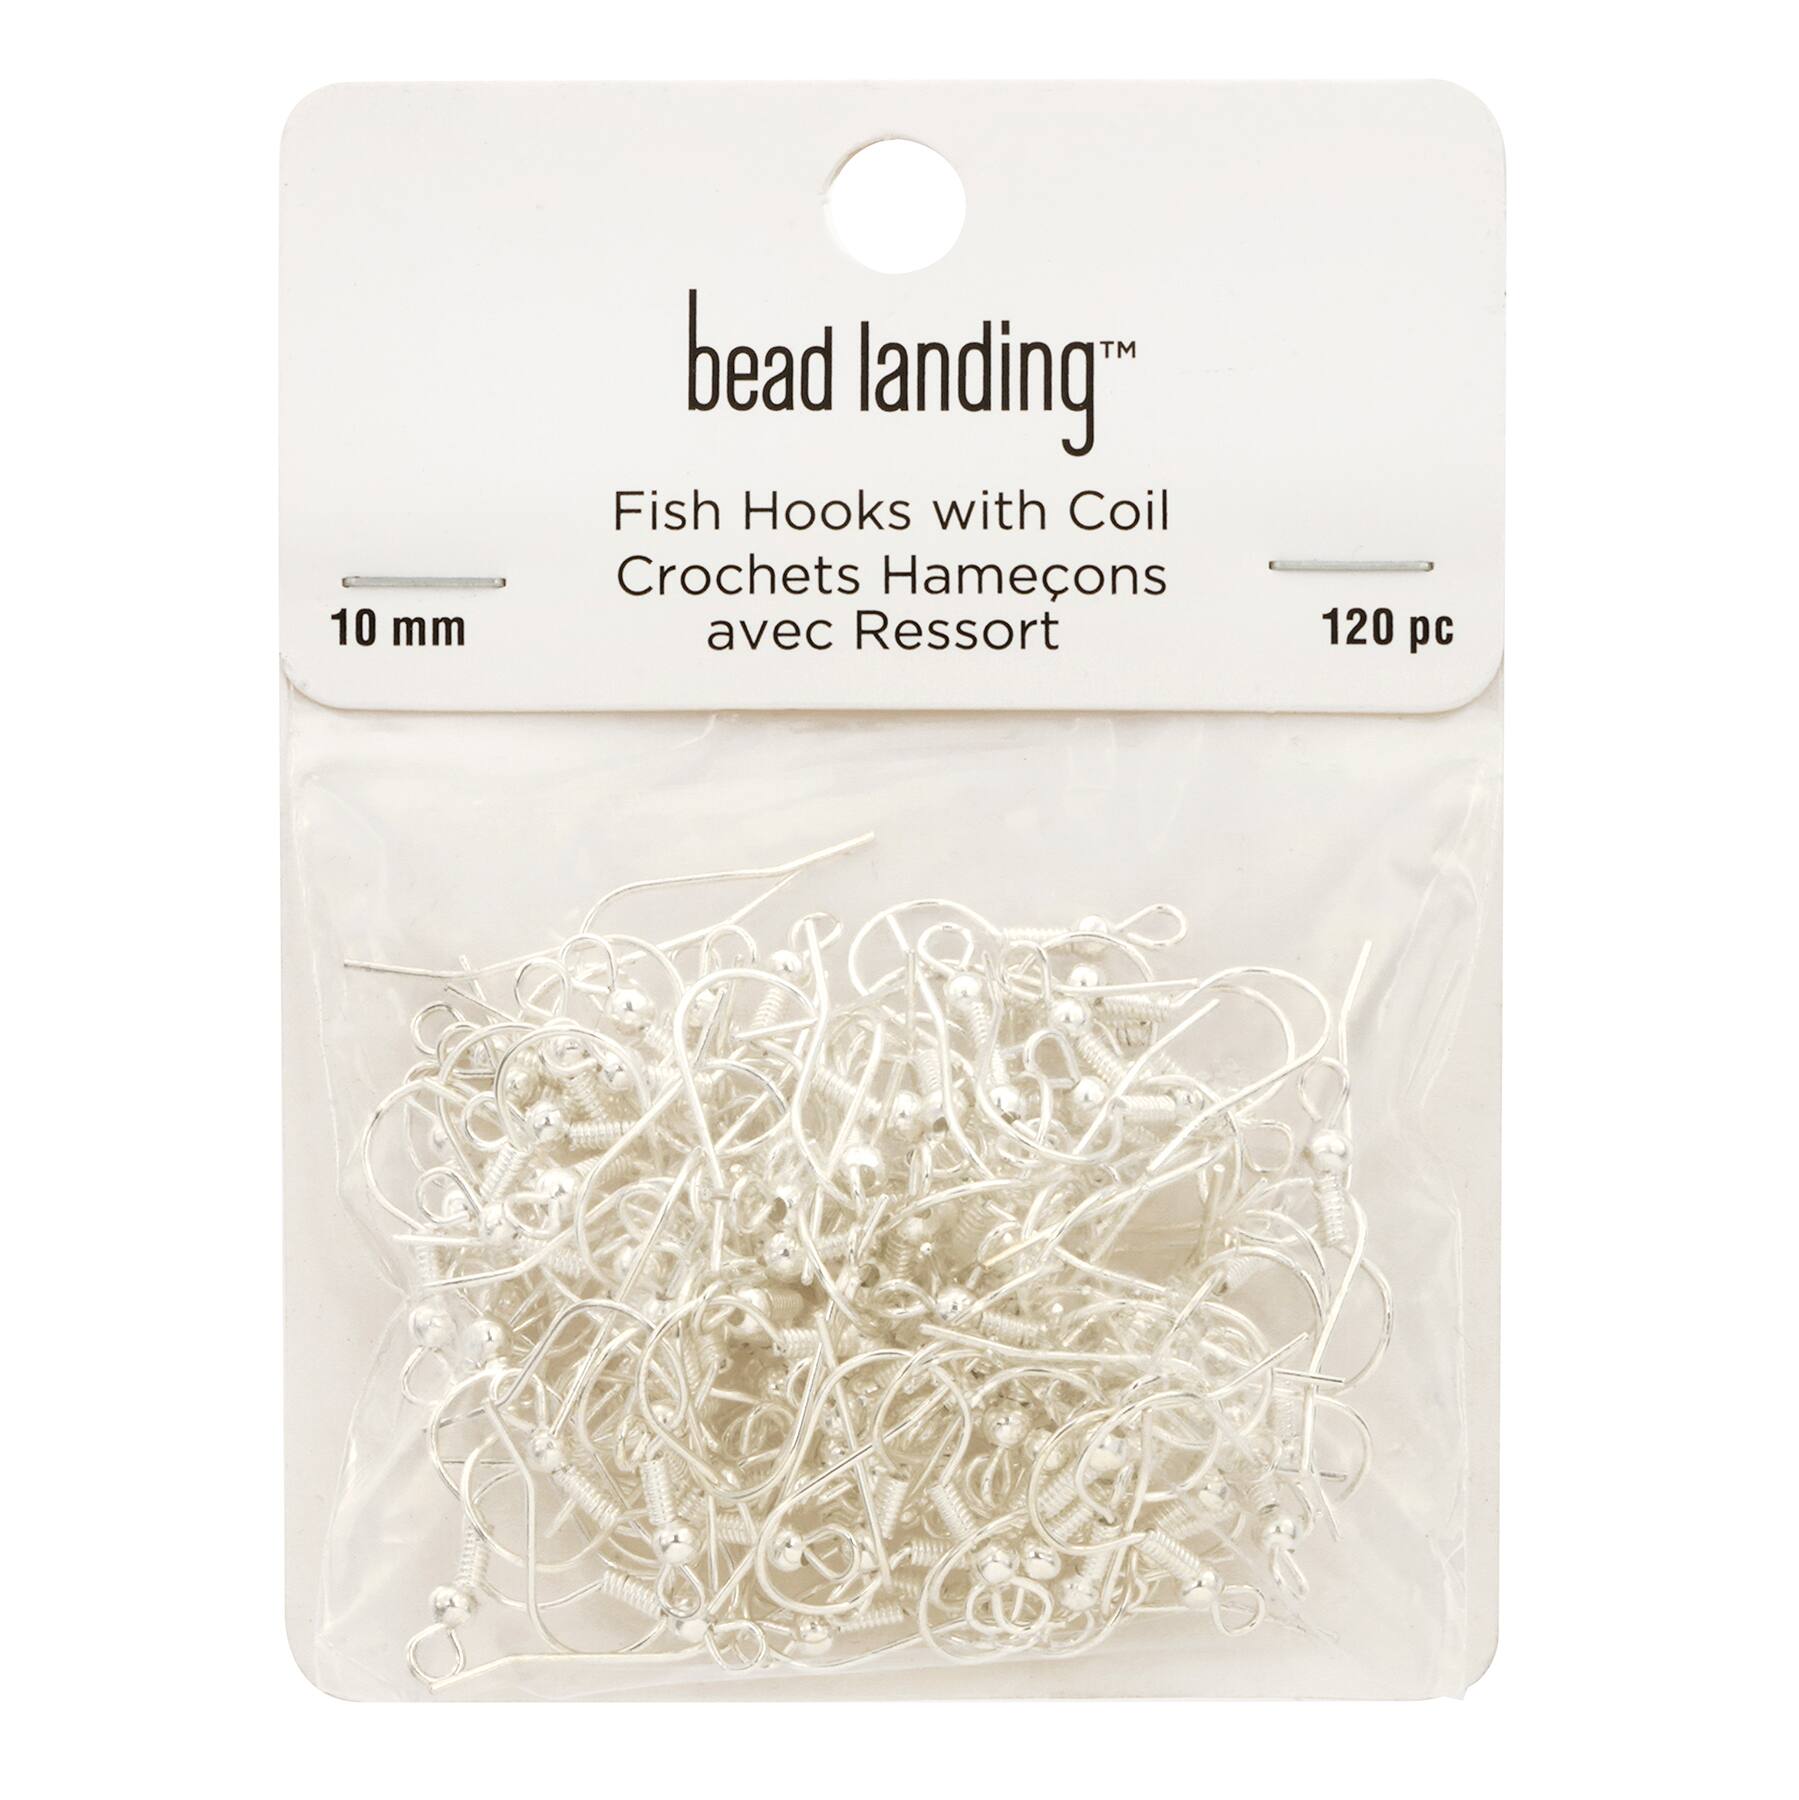 Bead Landing Fish Hooks With Coil - Gold - 120 ct